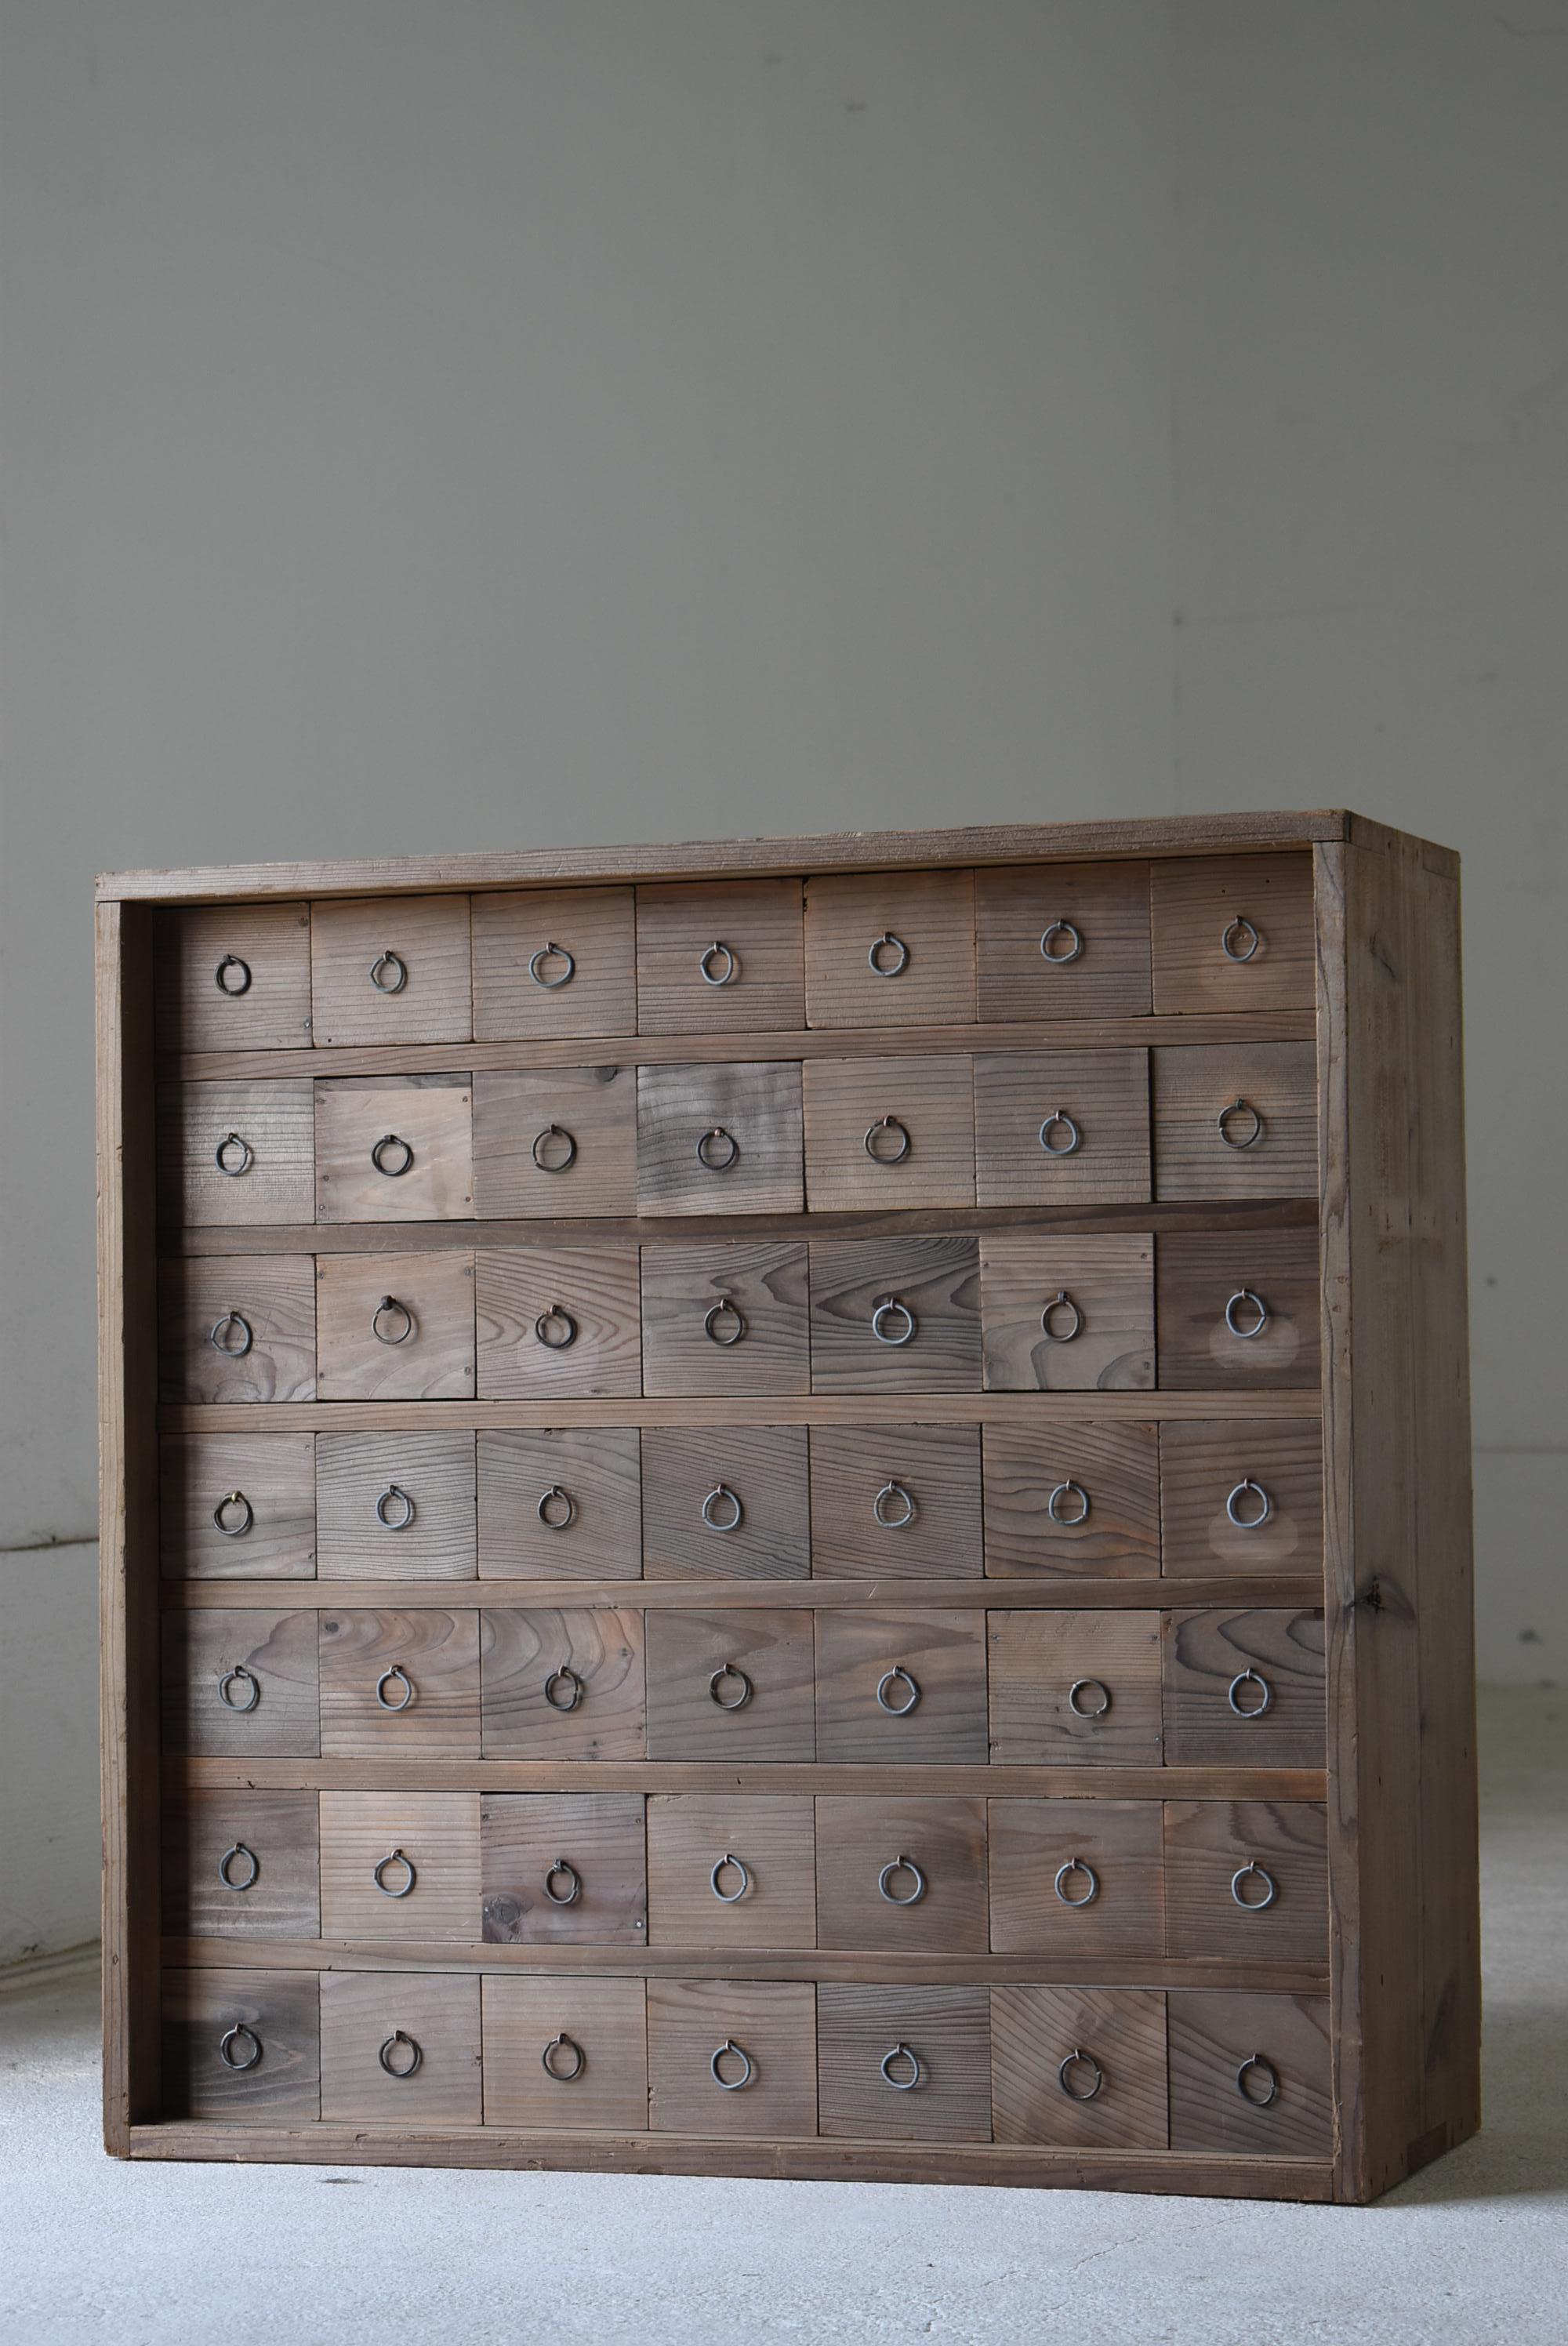 Japanned Japanese Antique Apothecary Drawers 1860s-1900s/Tansu Storage Mingei Cabinets